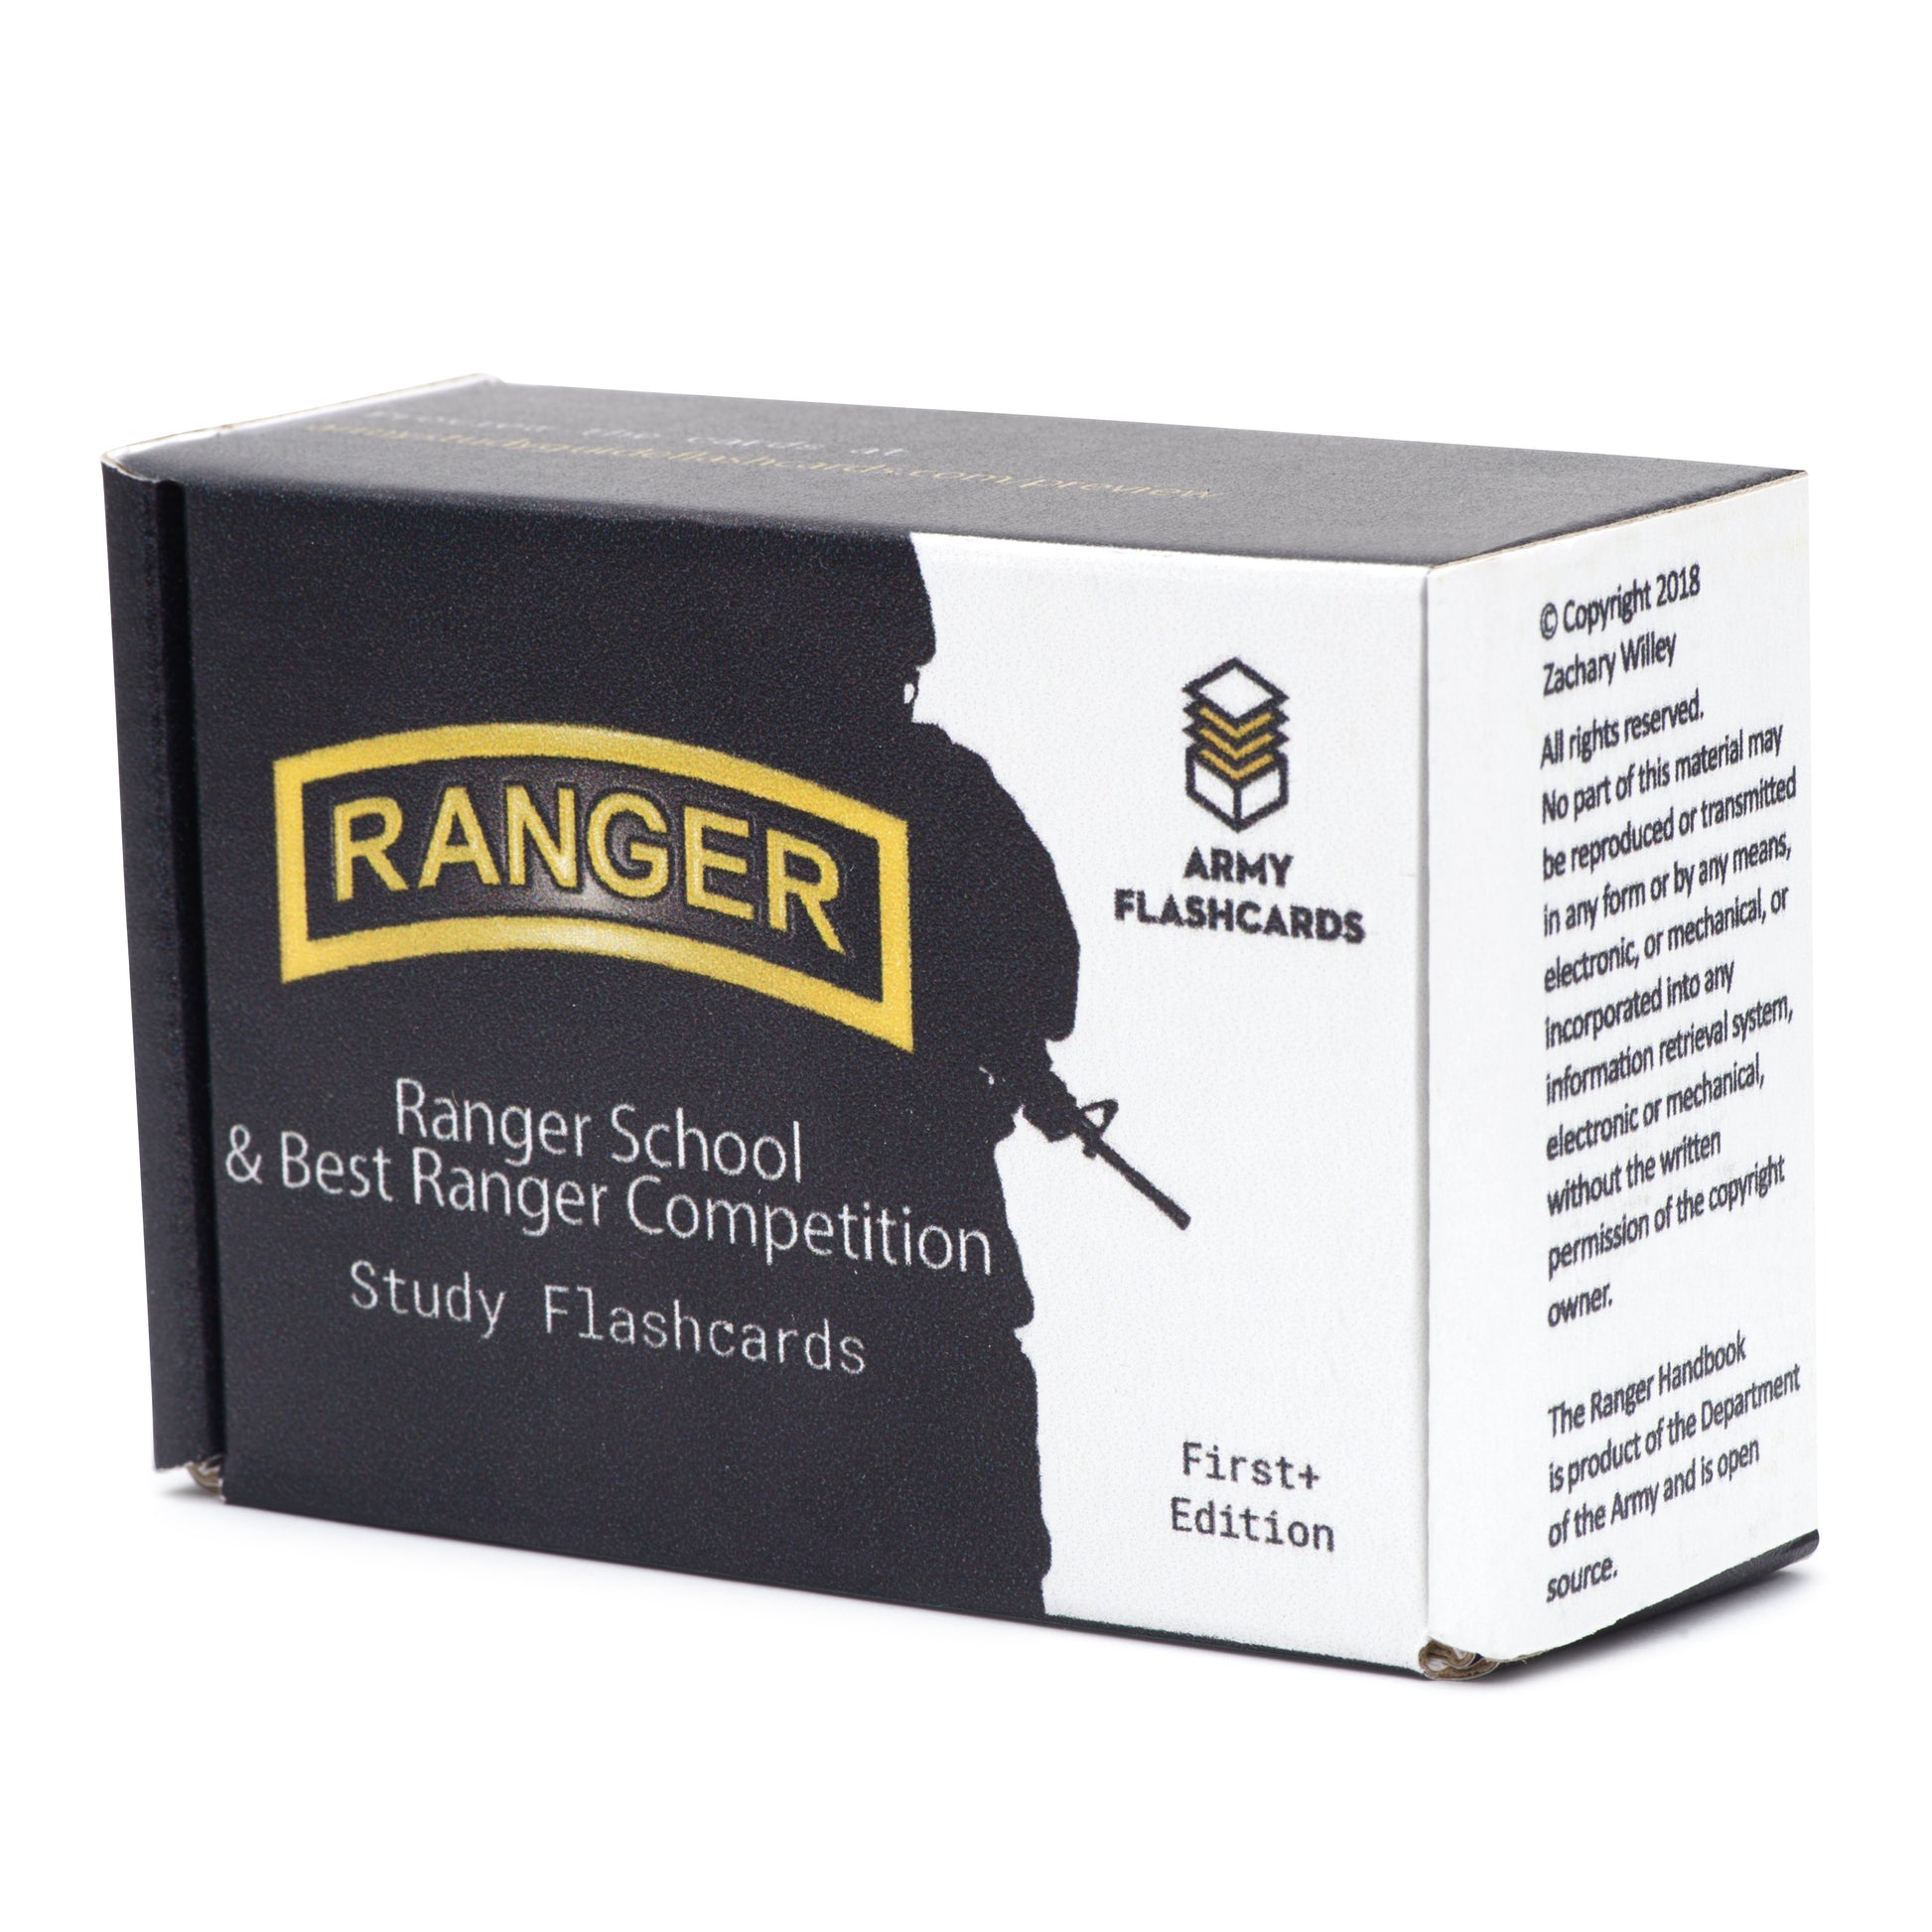 Ranger School / Best Ranger Competition Flashcards - Army Flashcards